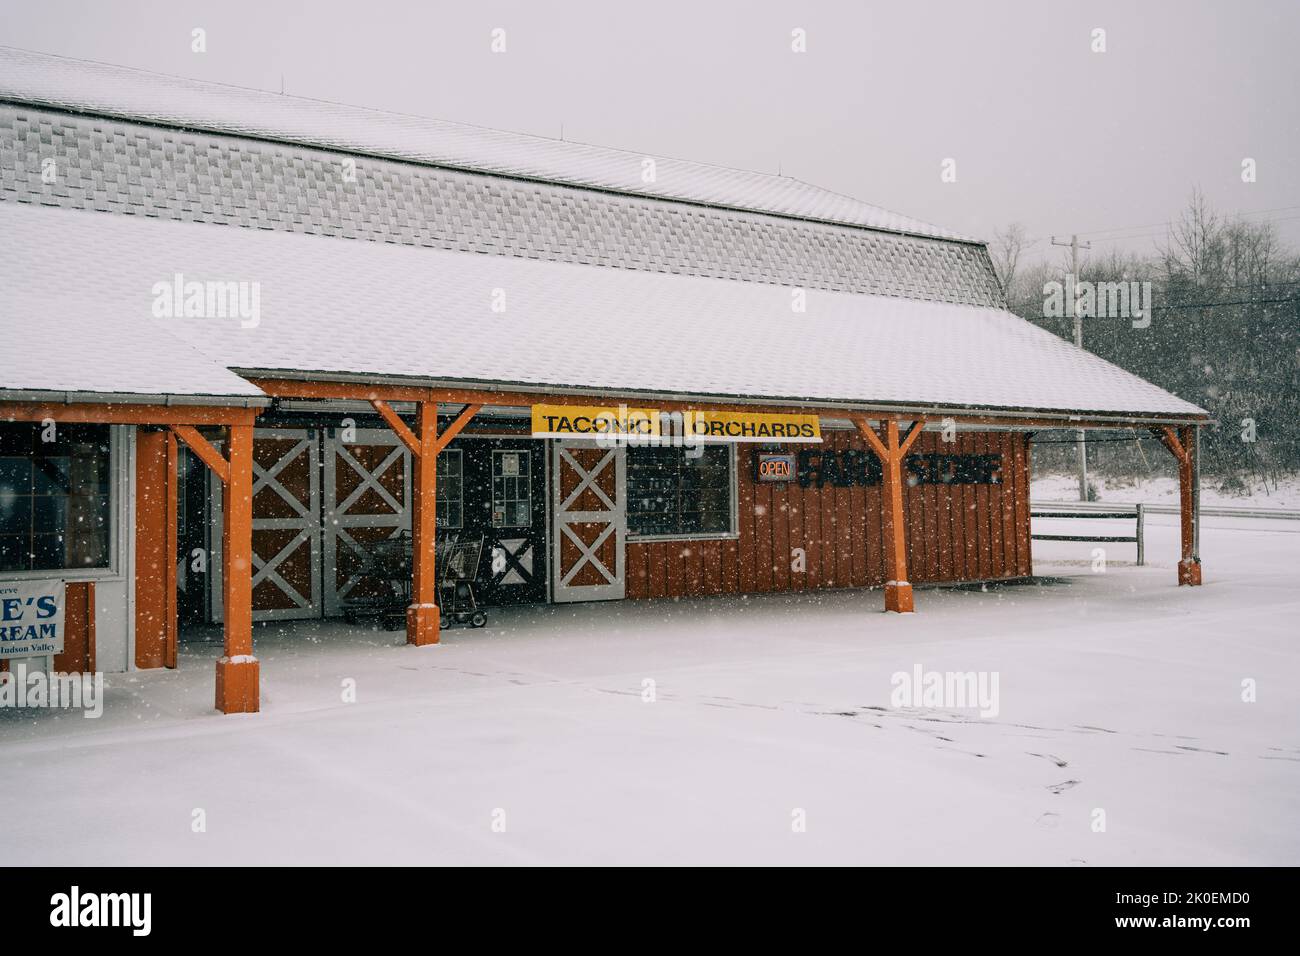 Taconic Orchards during a snowstorm, Hudson, New York Stock Photo